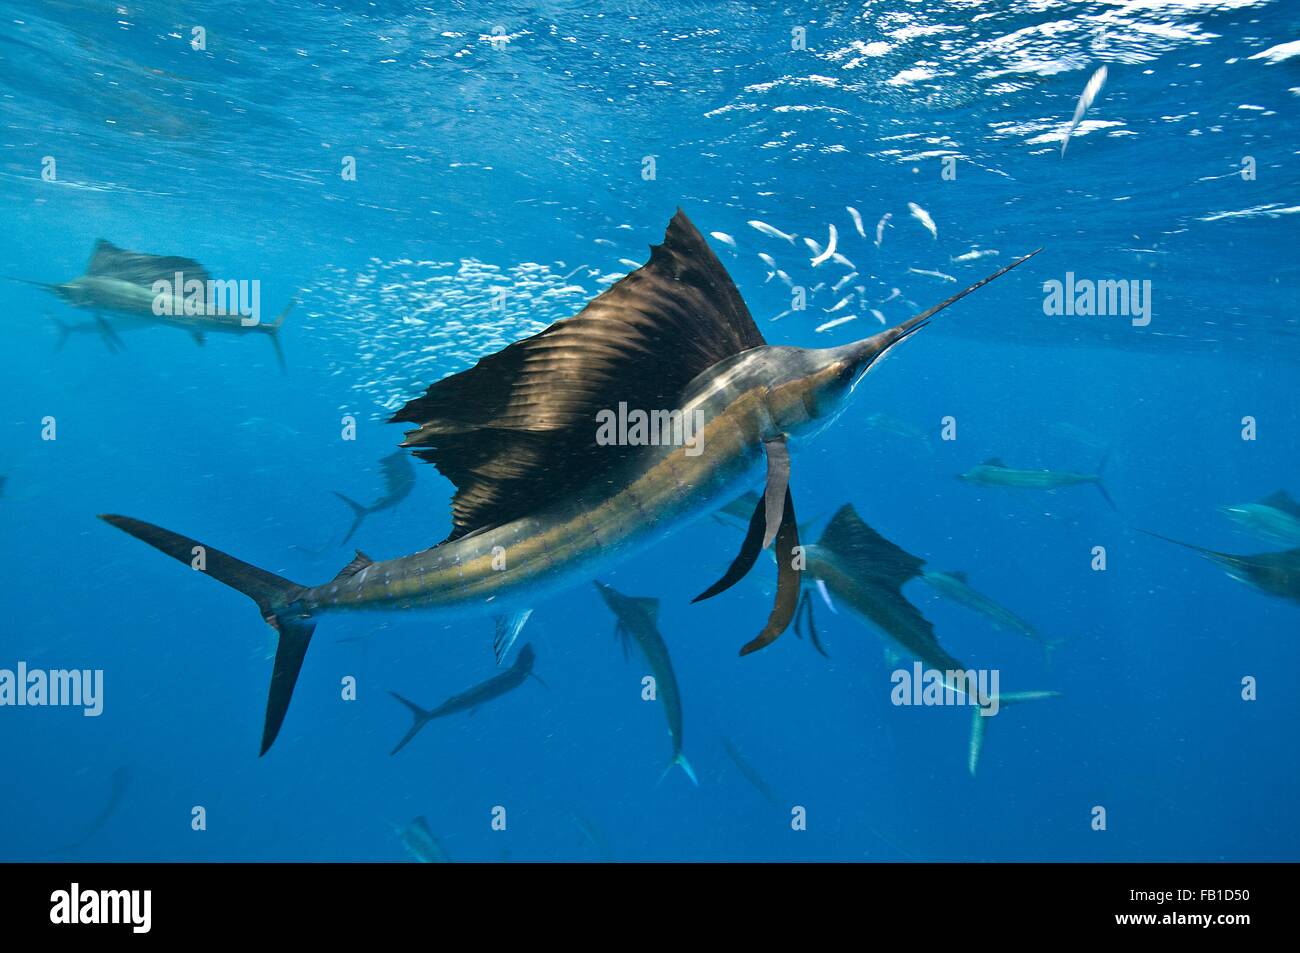 Underwater view of group of sailfish corralling sardine shoal at surface, Contoy Island, Quintana Roo, Mexico Stock Photo